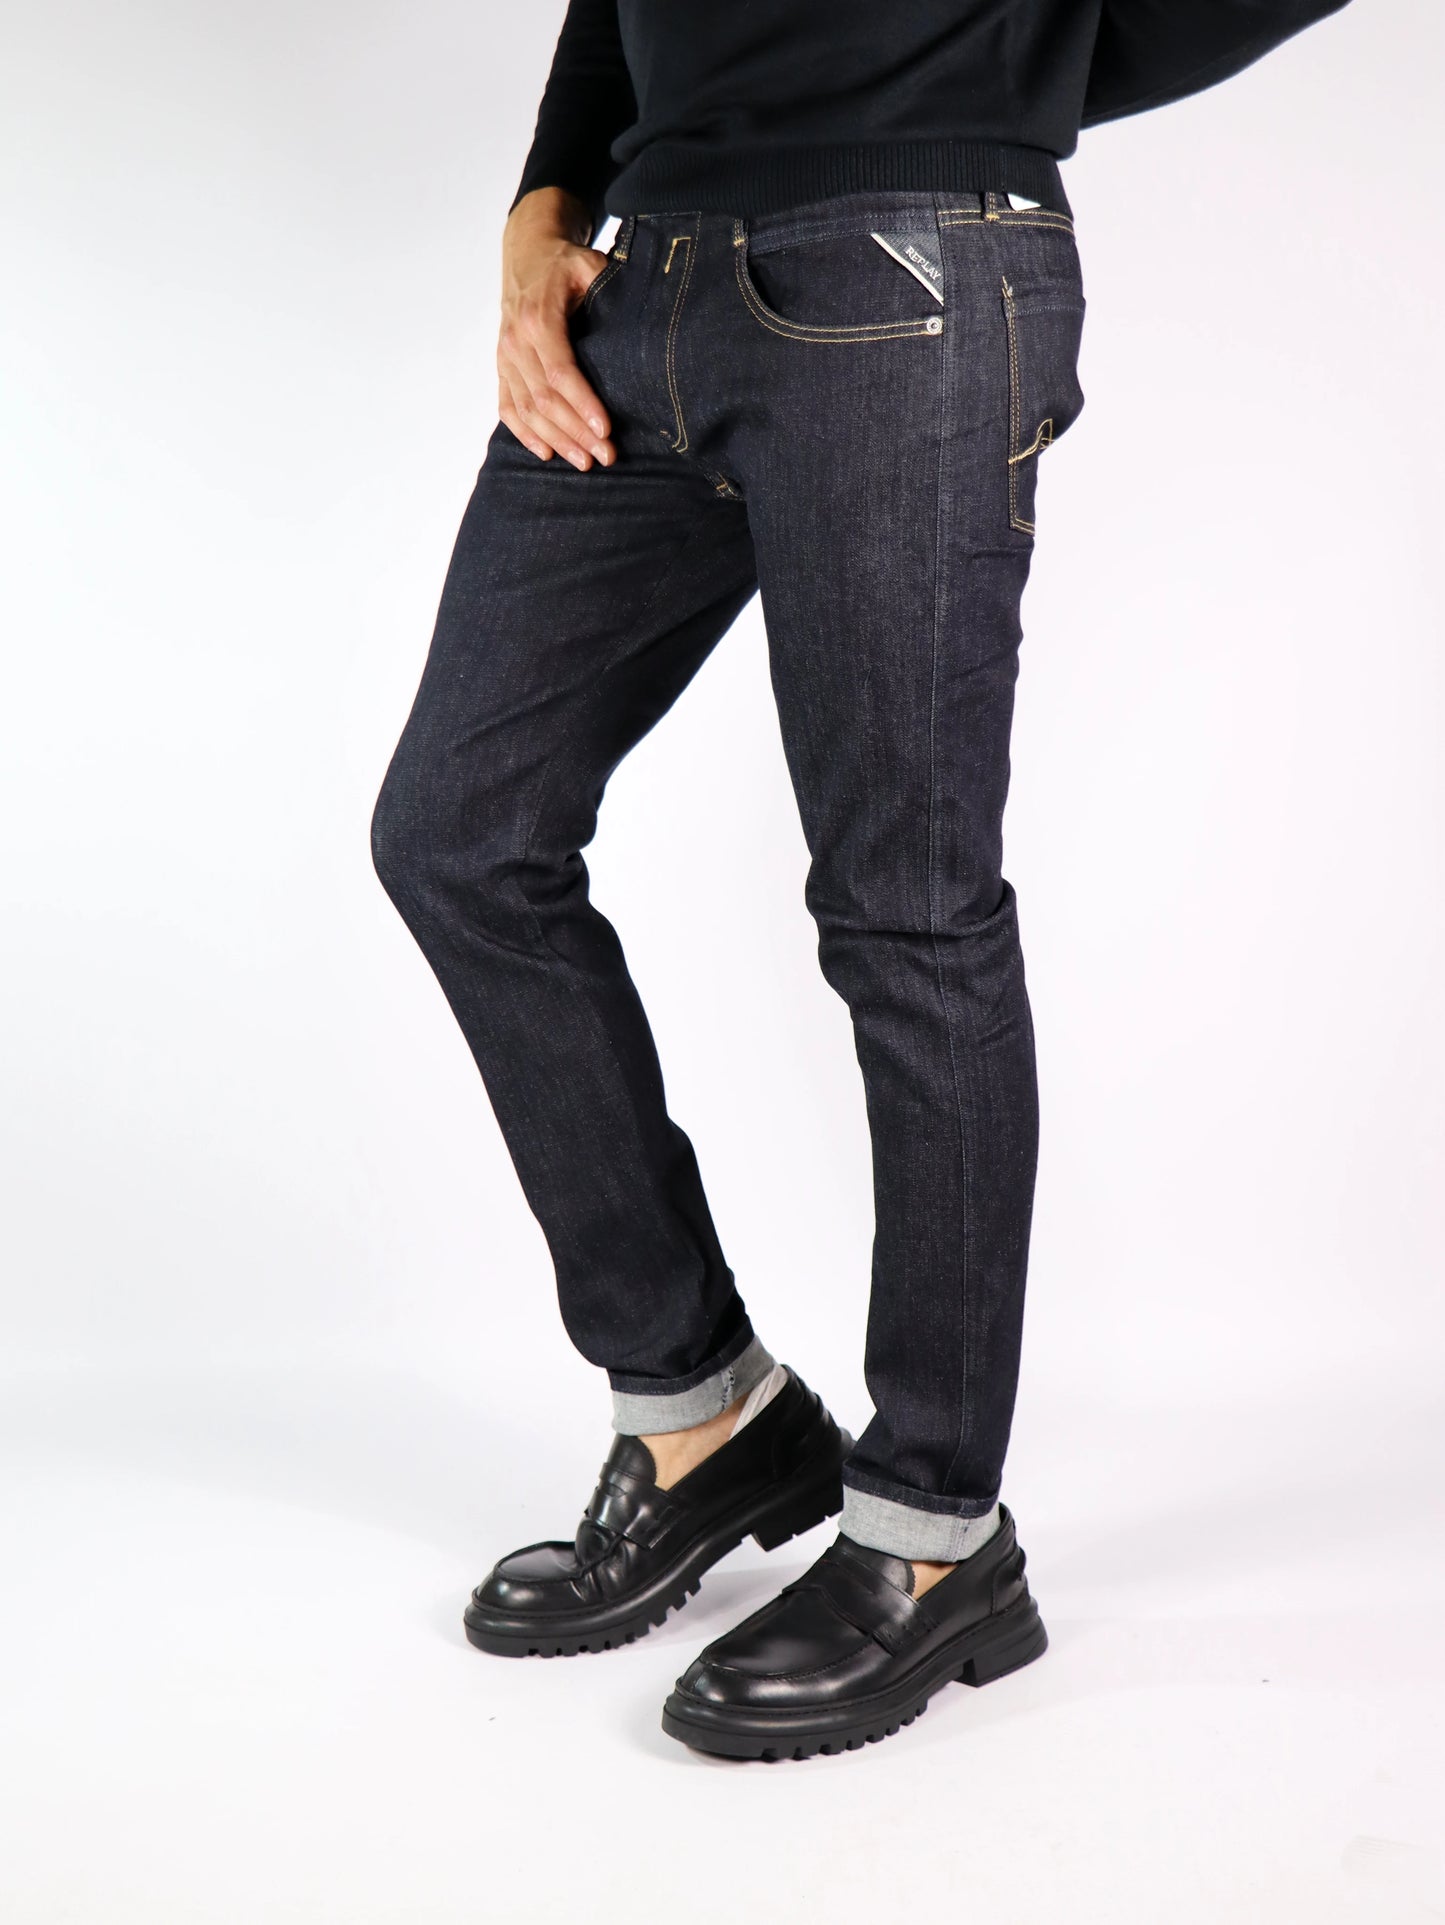 Jeans scuro Hiperfelx REPLAY 661Y